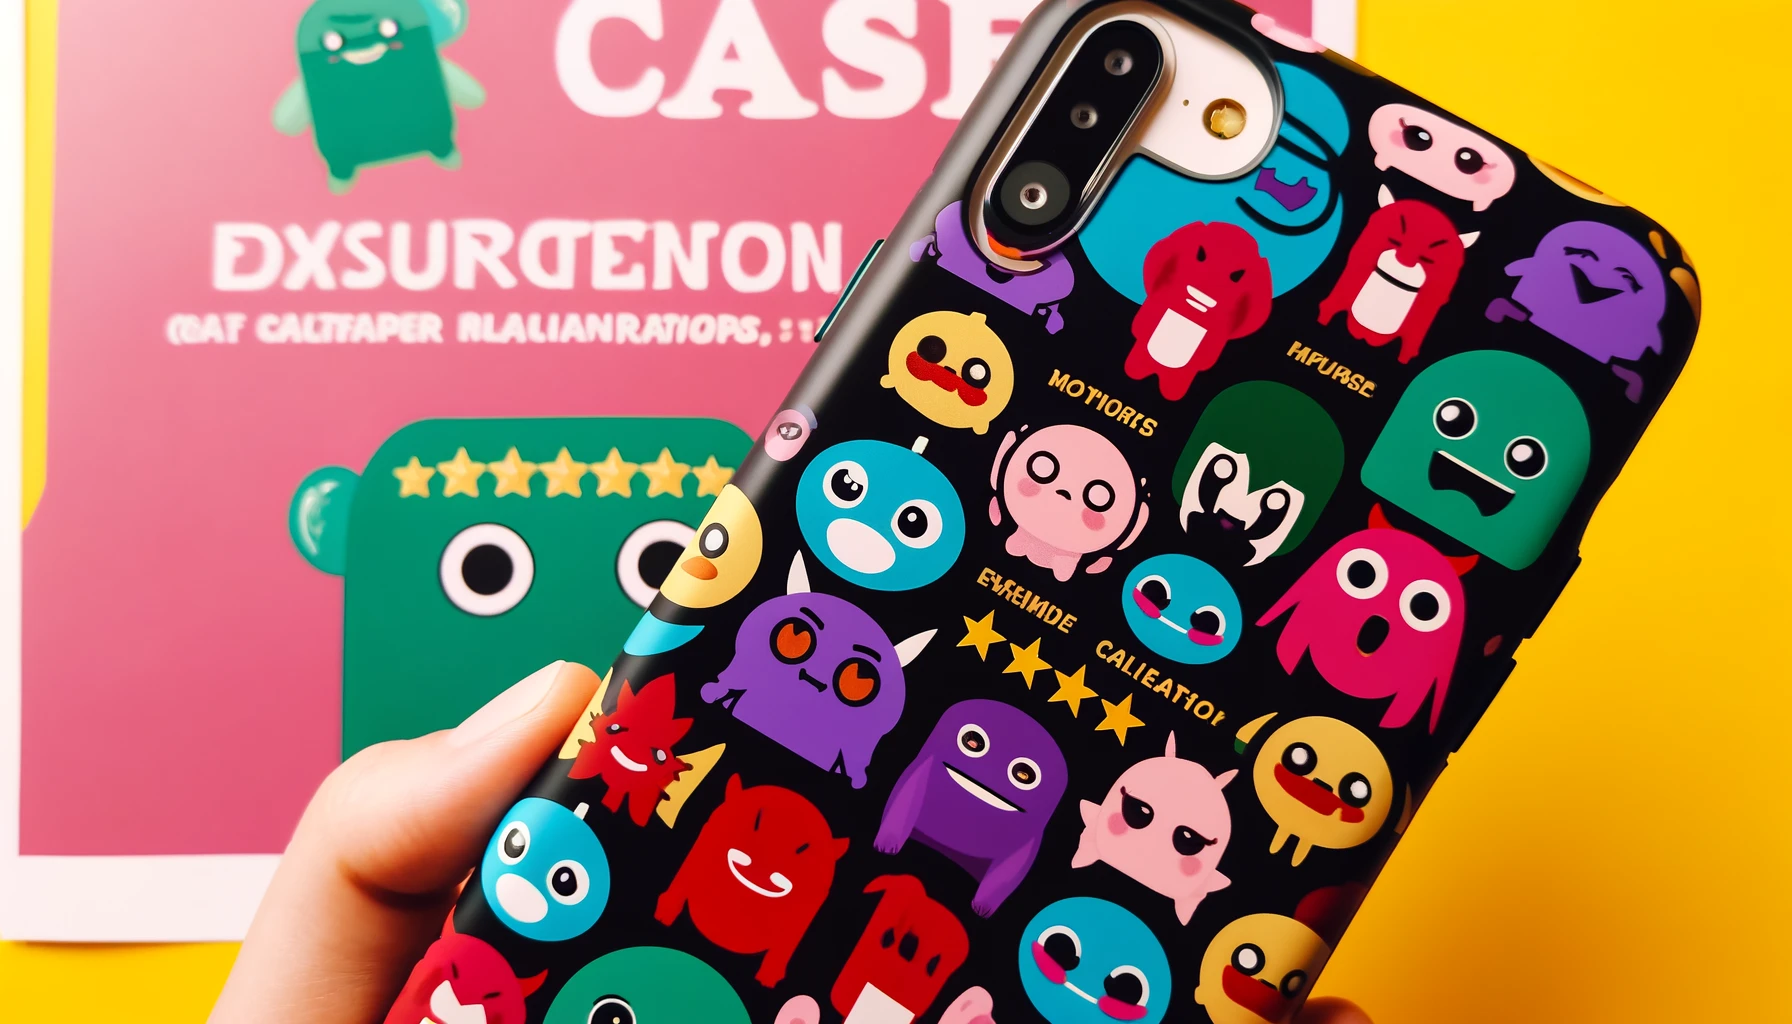 A vibrant image showcasing customer reviews and feedback for CASETiFY smartphone cases featuring small monster anime character collaboration products. The design should include positive comments and ratings to reflect the satisfaction and excitement of the customers. The word 'CASE' should be prominently displayed on the image.